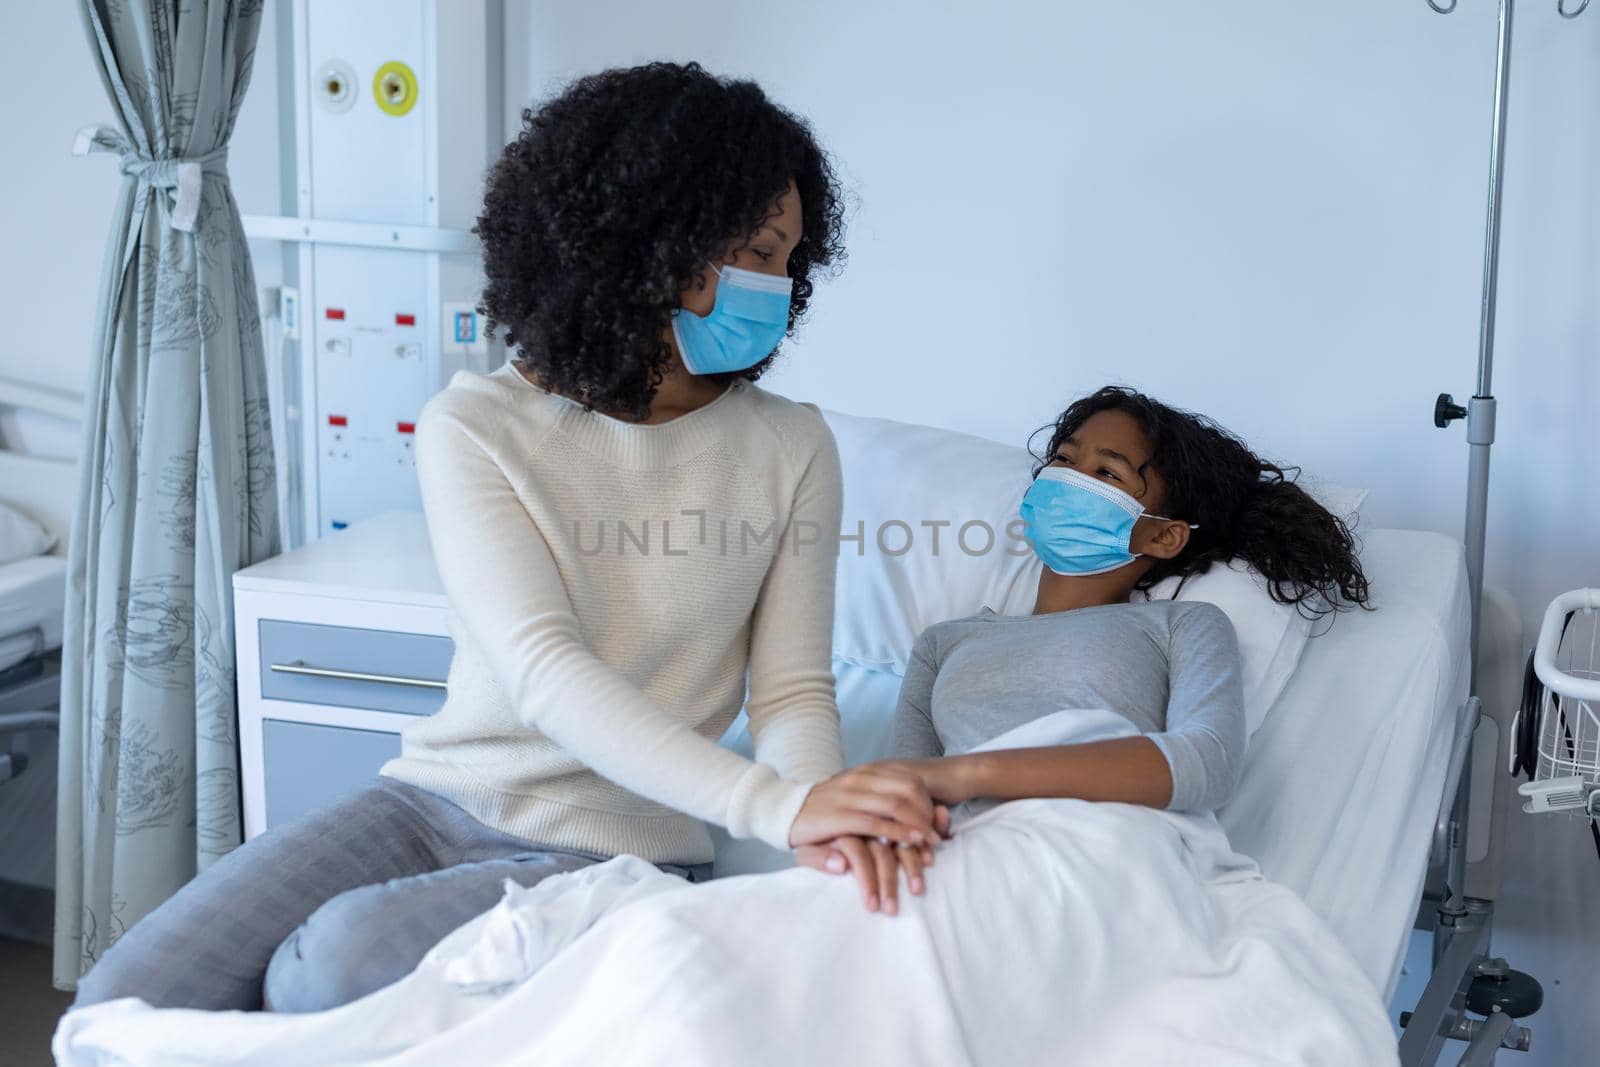 Mixed race mother comforting ill daughter in hospital bed, holding hands, both wearing face masks. medicine, health and healthcare services during coronavirus covid 19 pandemic.